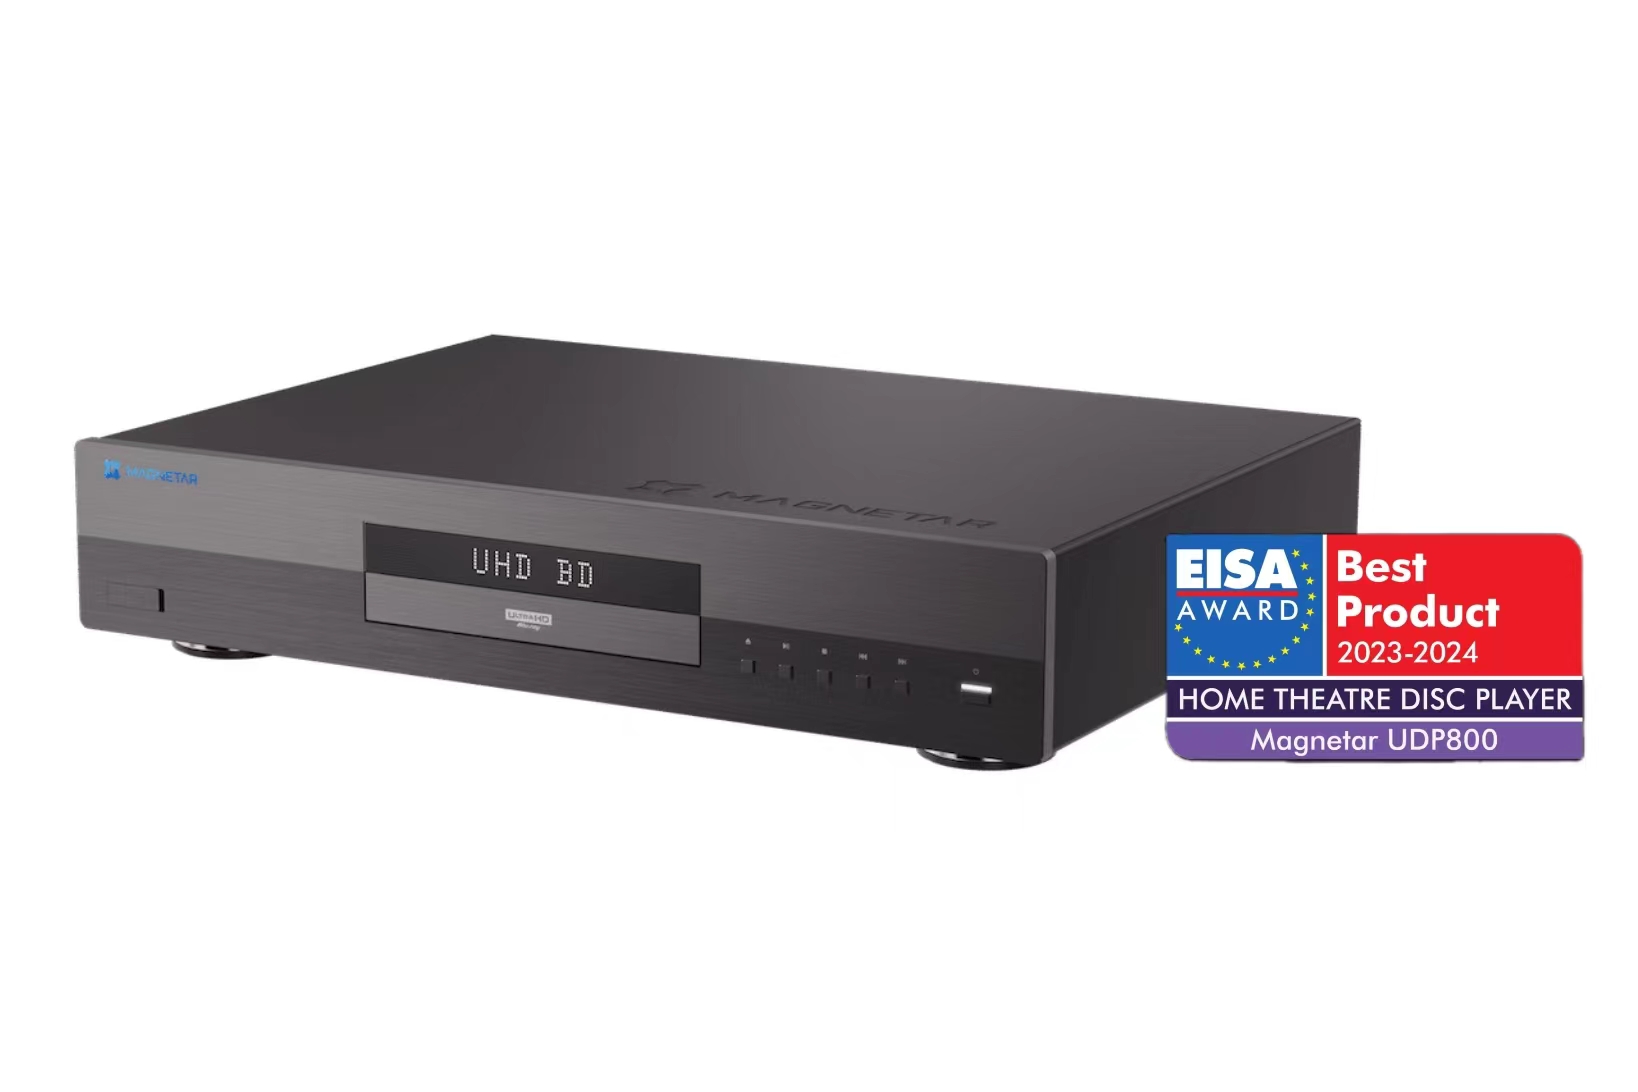 Magnetar UDP800 review: a 4K Blu-ray player with astounding video